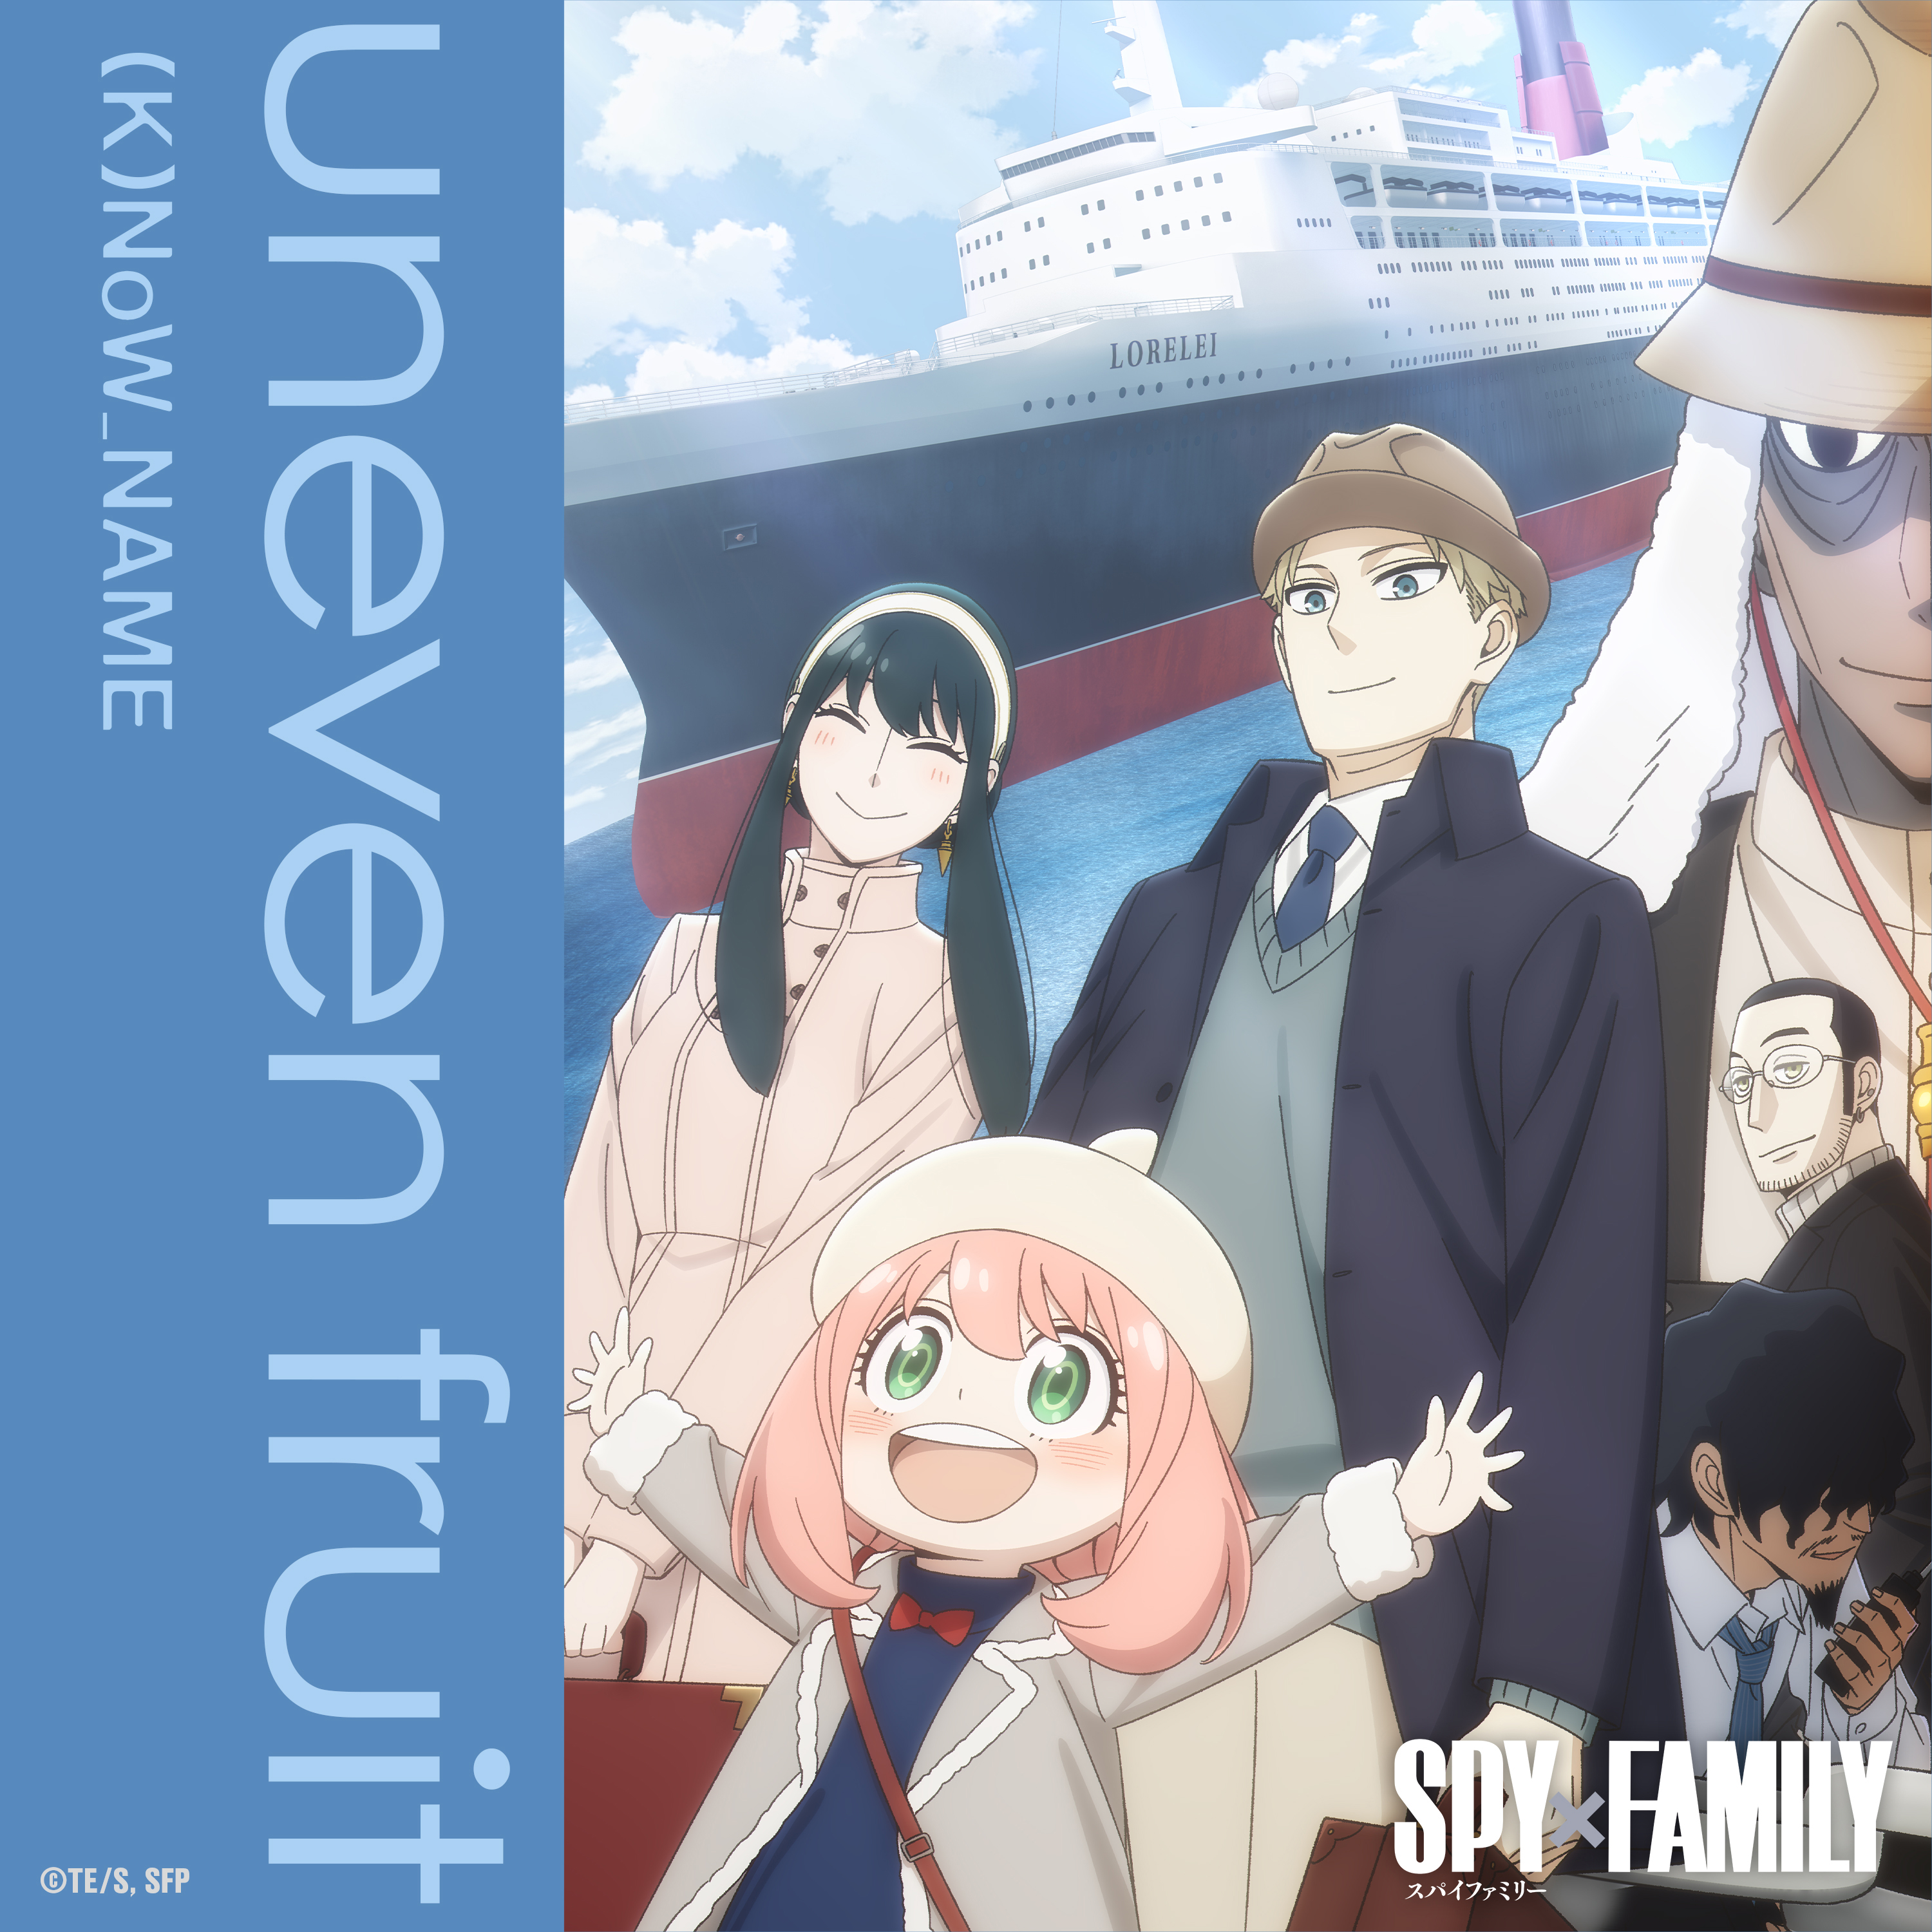 Spy x Family part 2 review: A near perfect slice of life - Dexerto